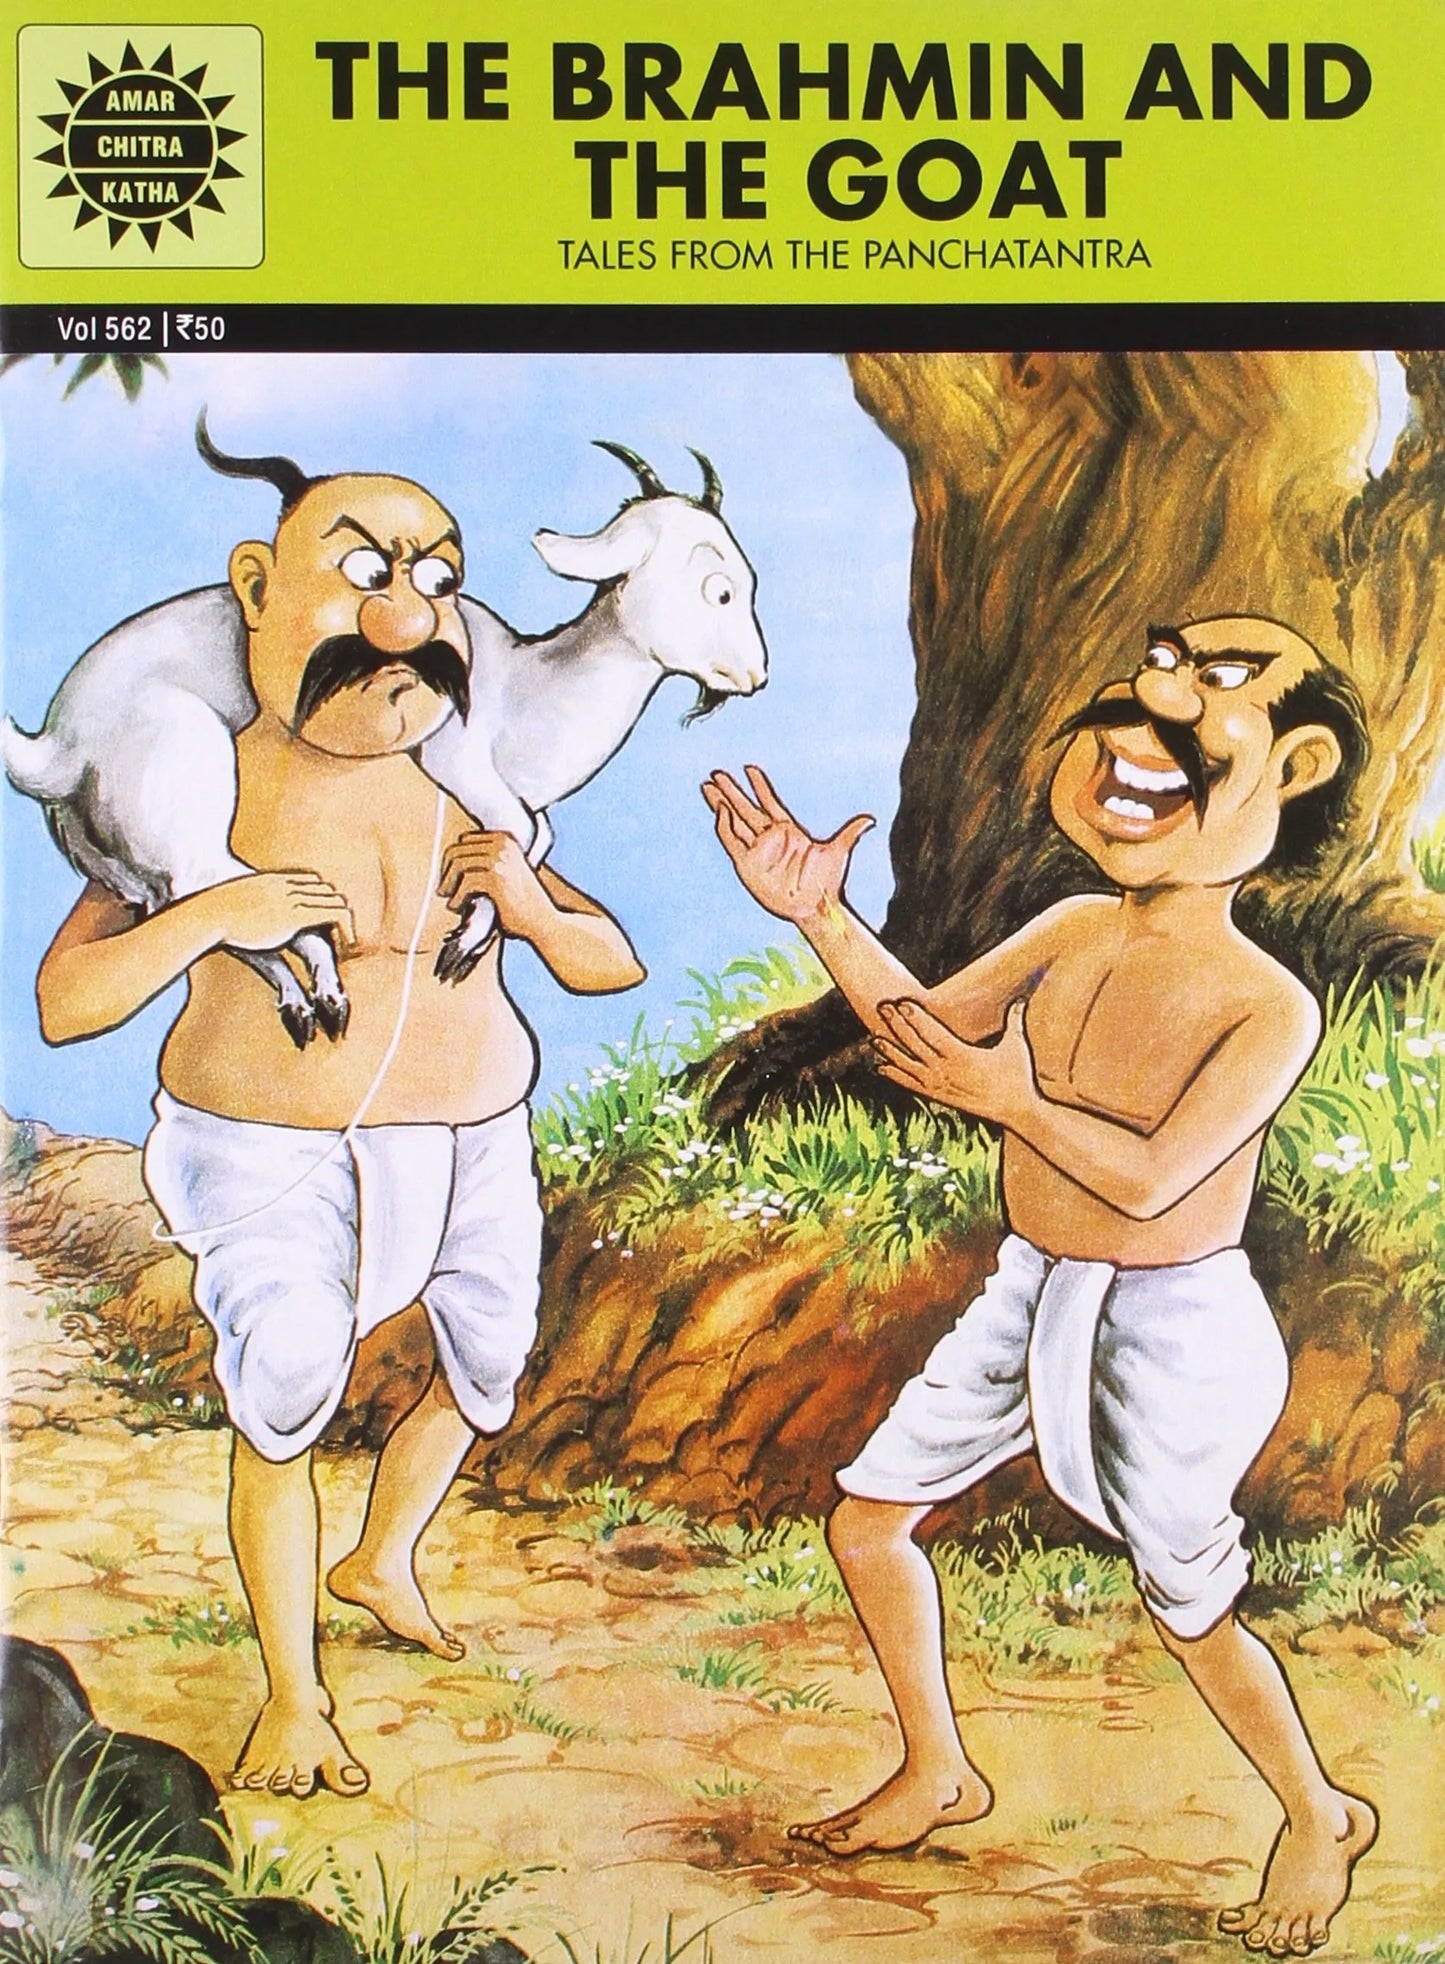 Amar Chitra Katha - The Brahmin And The Goat - Tales from The Panchatantra